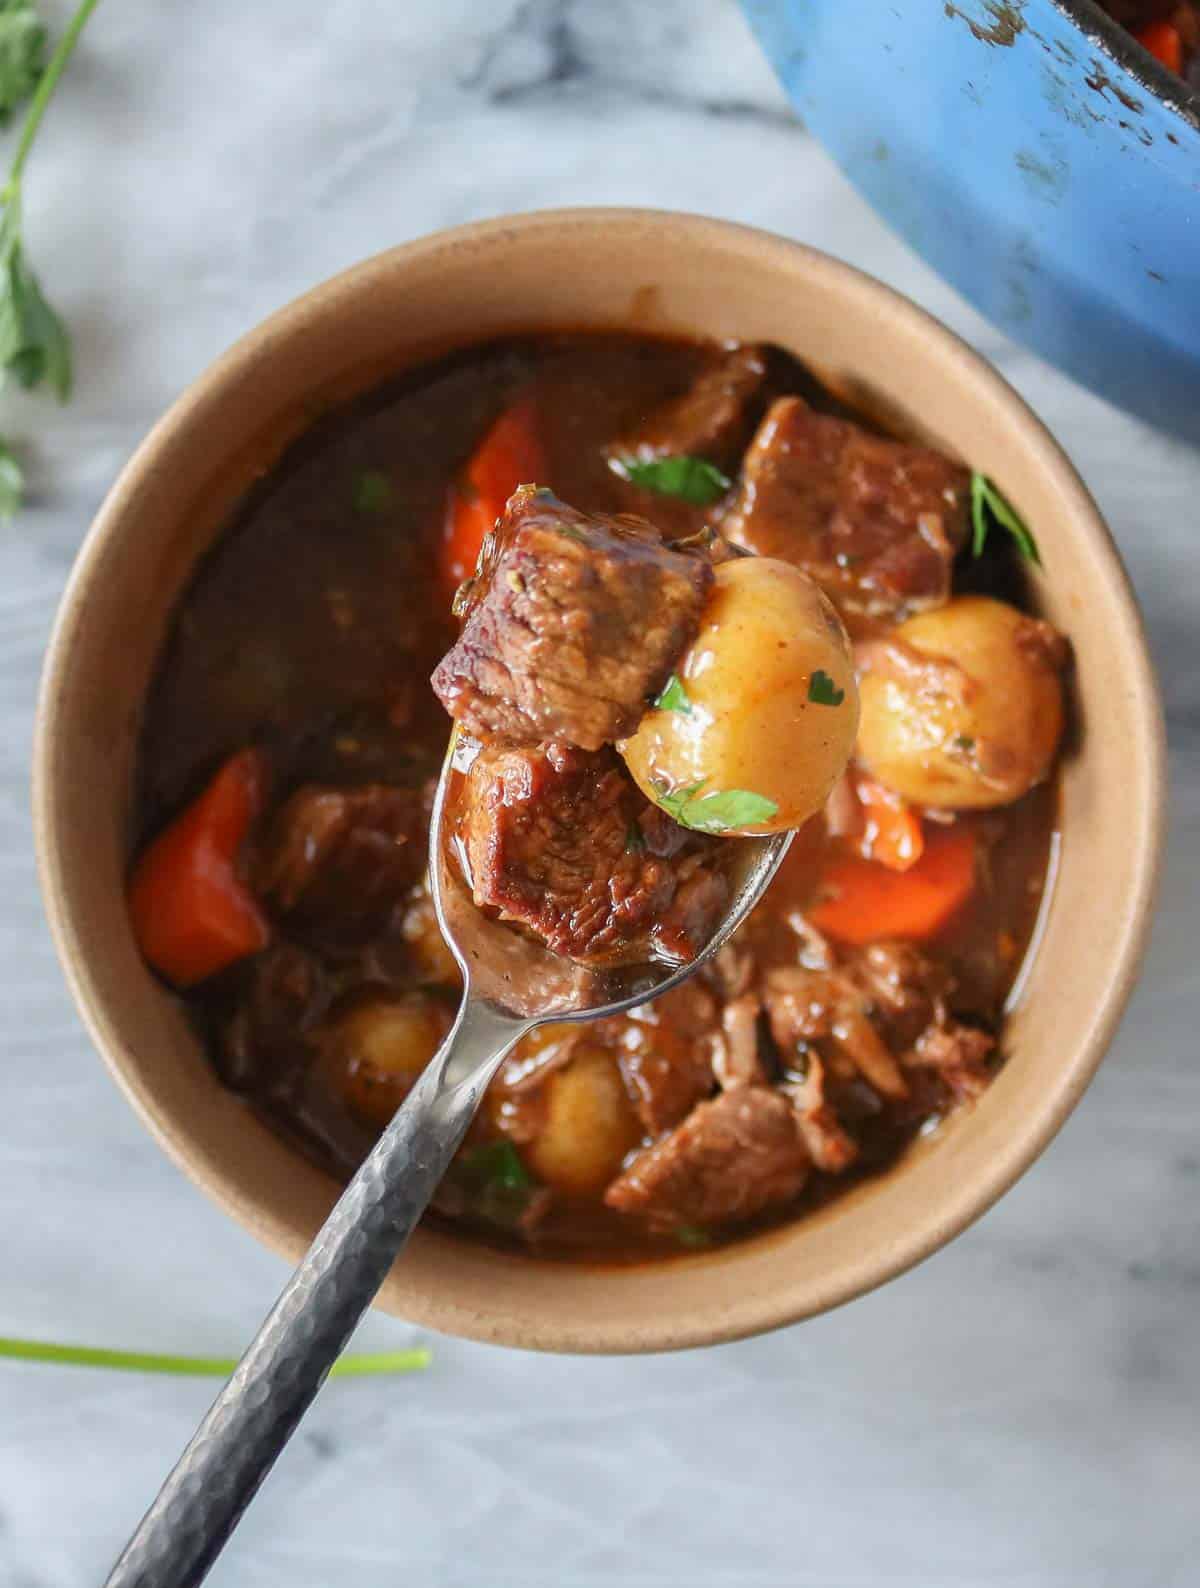 Spoonful of beef stew from a bowl.